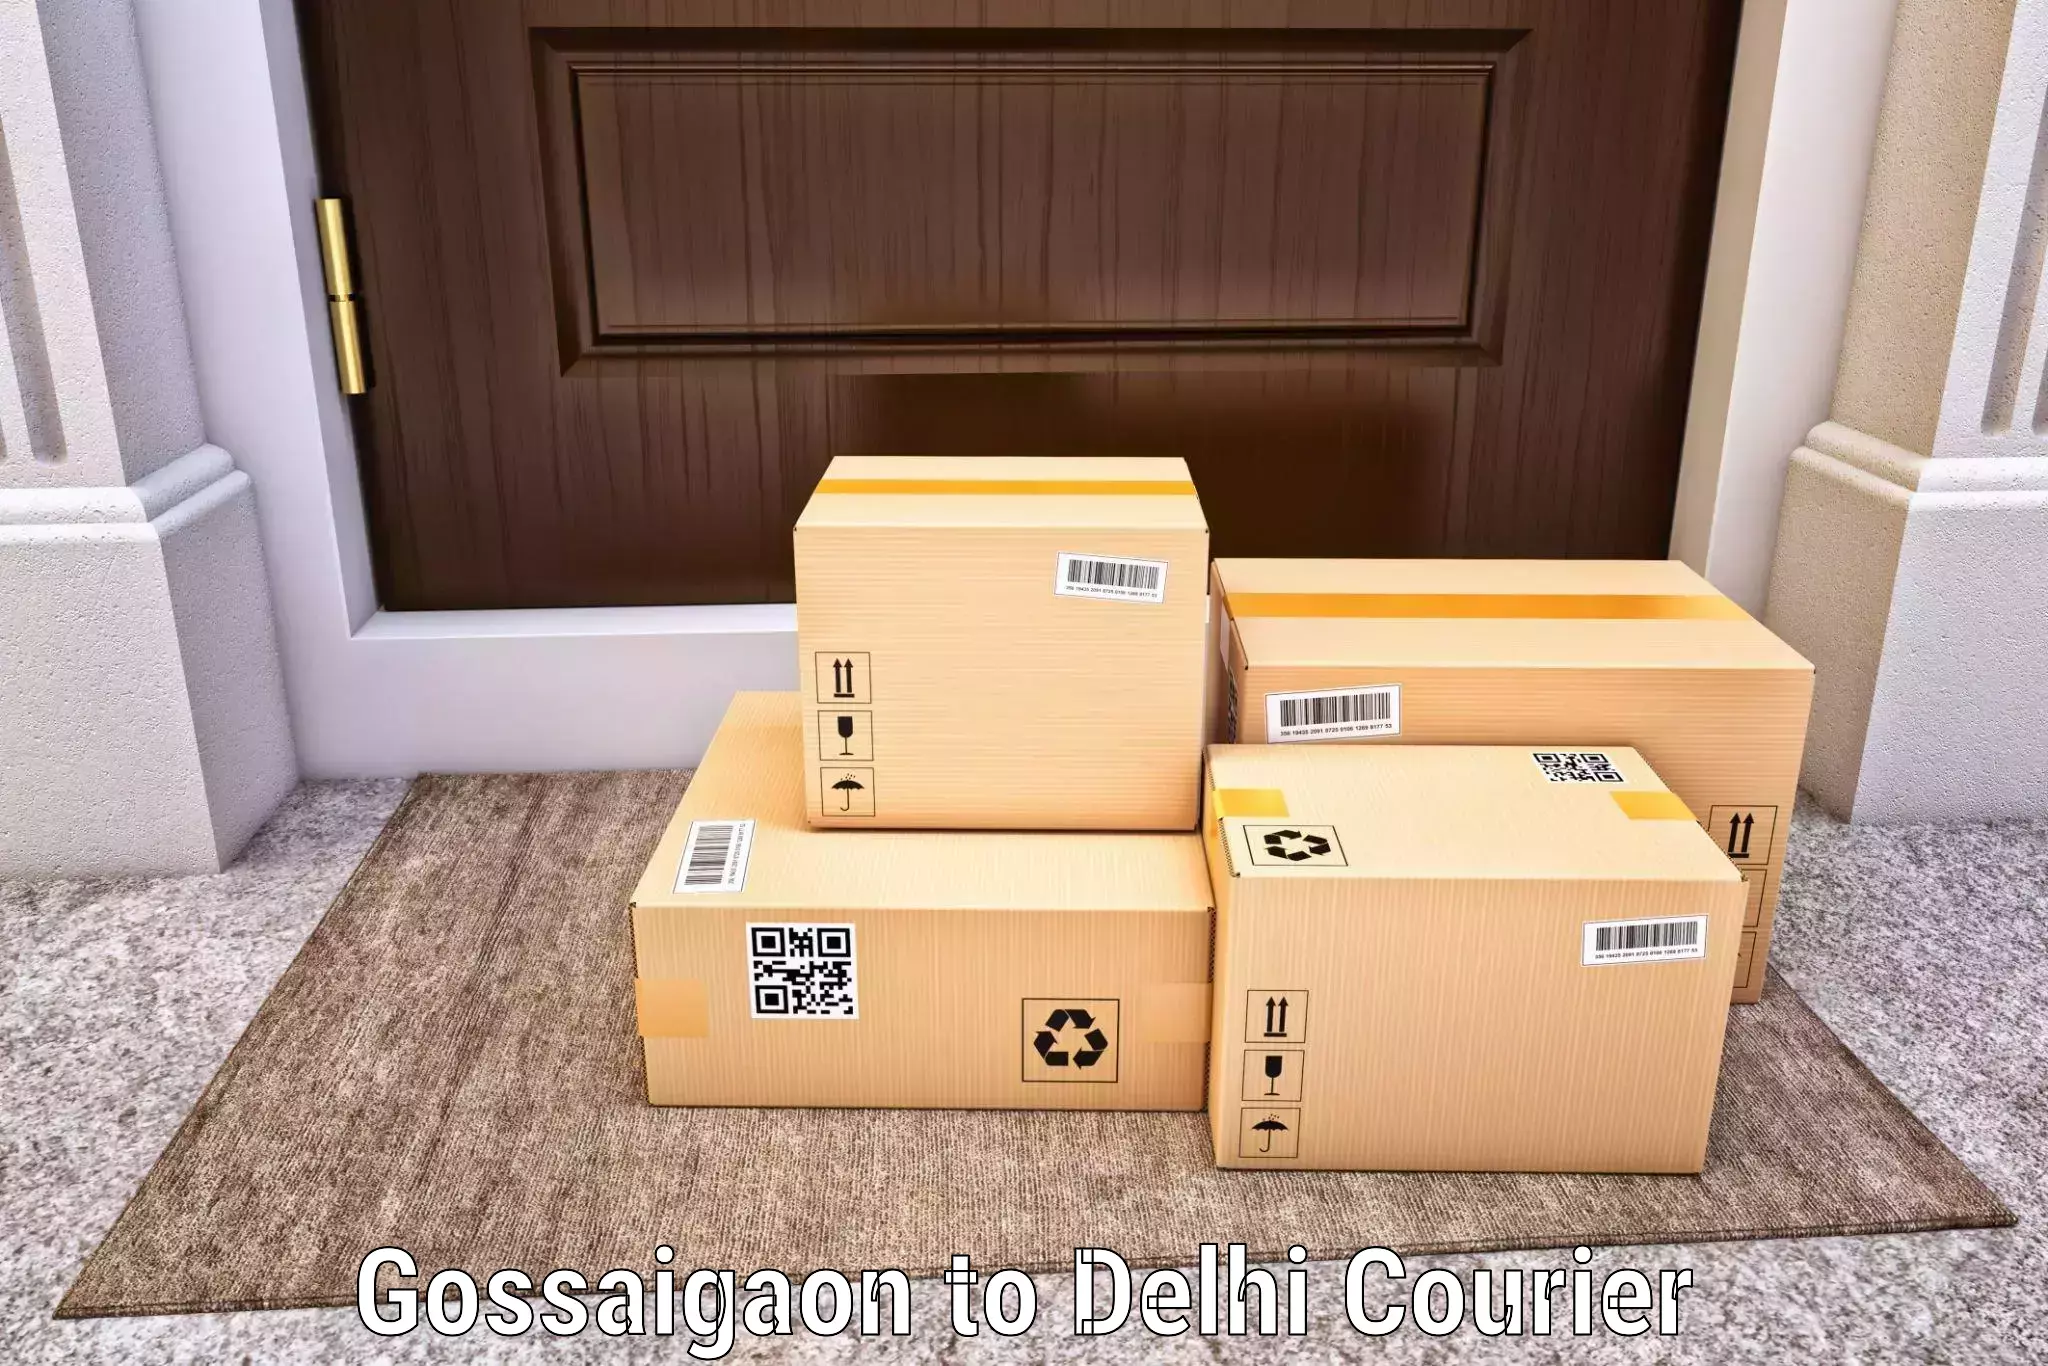 Full-service courier options Gossaigaon to University of Delhi